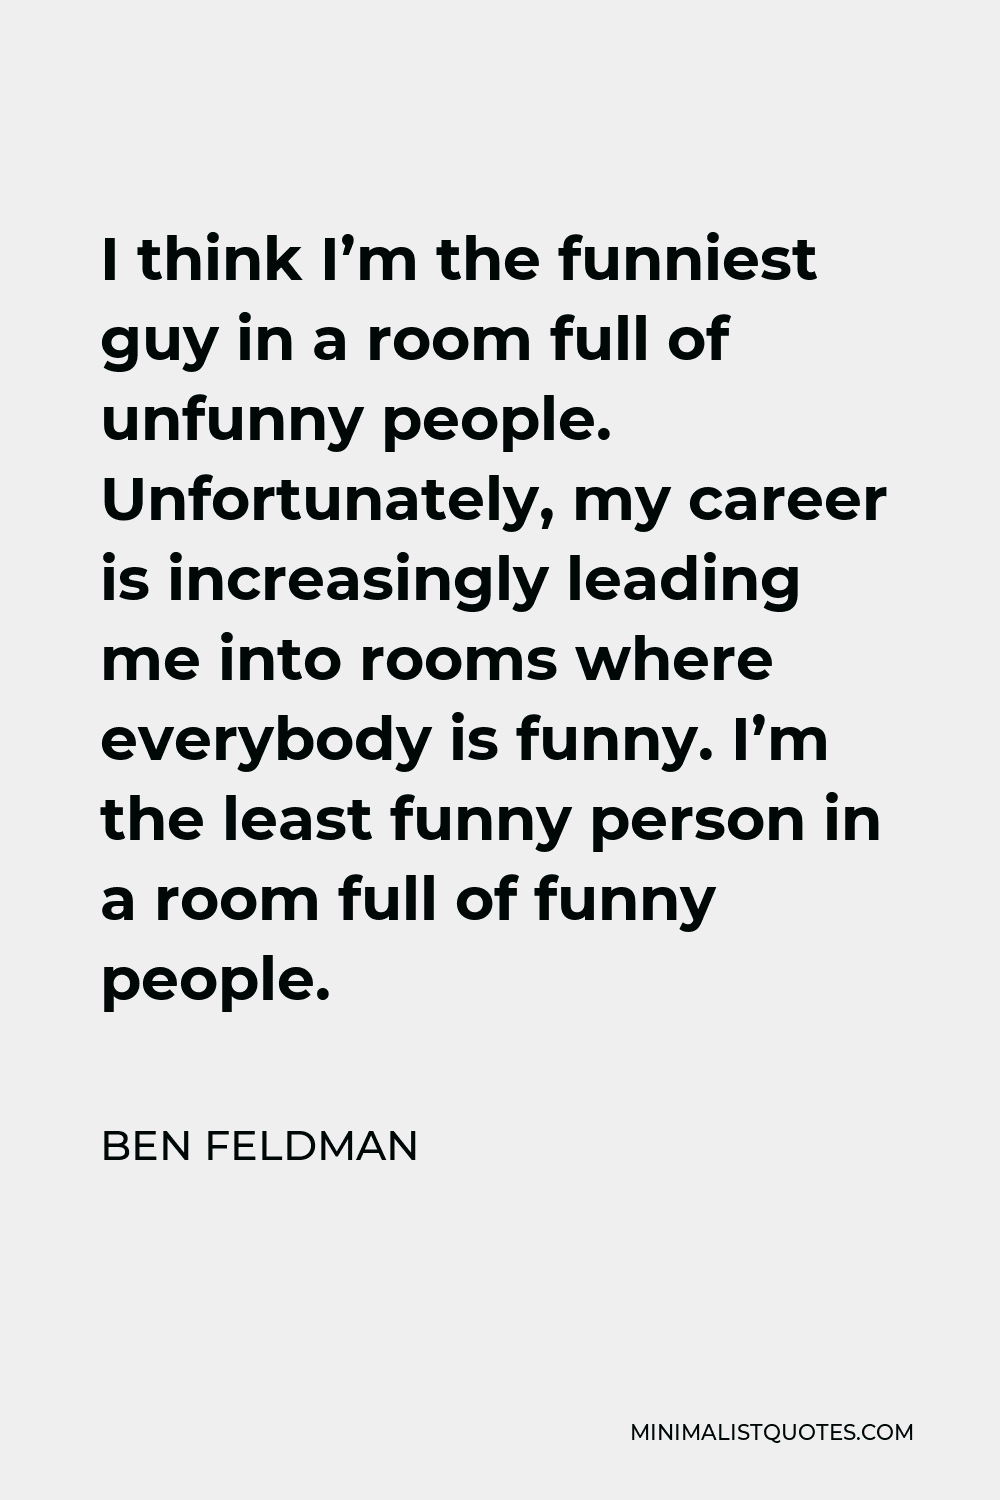 Ben Feldman Quote - I think I’m the funniest guy in a room full of unfunny people.